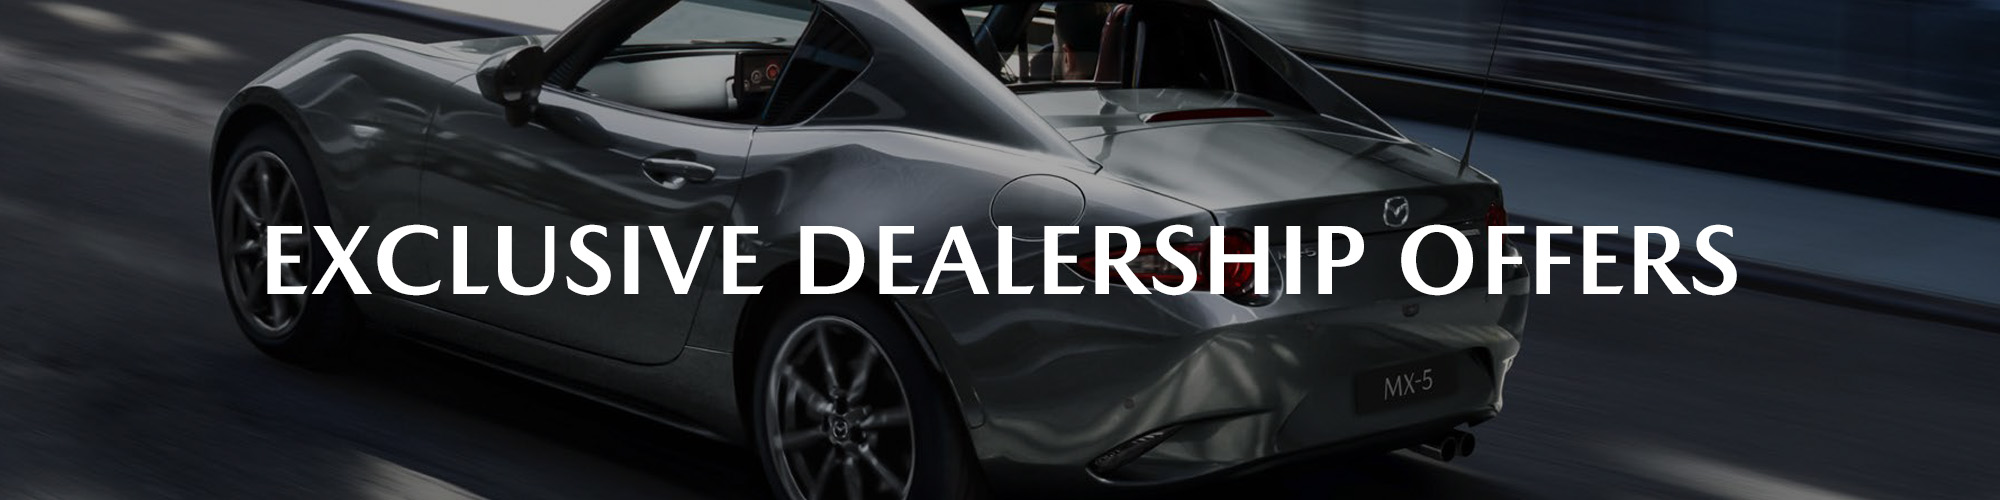 Exclusive Dealers Offers